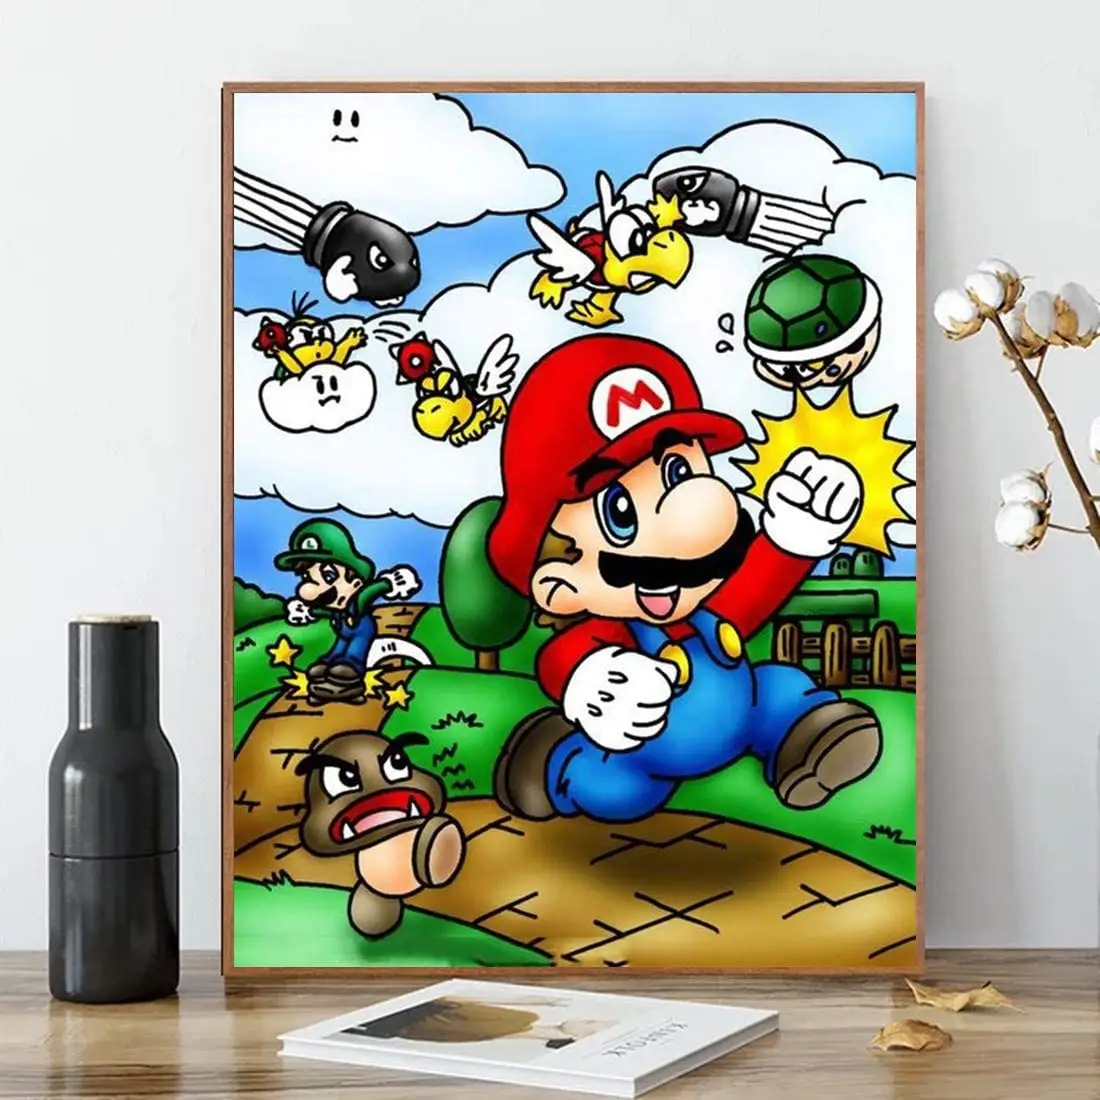 Paint by Numbers Kits for Adults Kids DIY Painting by Numbers Super Mario DIY Canvas Painting by Numbers Acrylic Painting